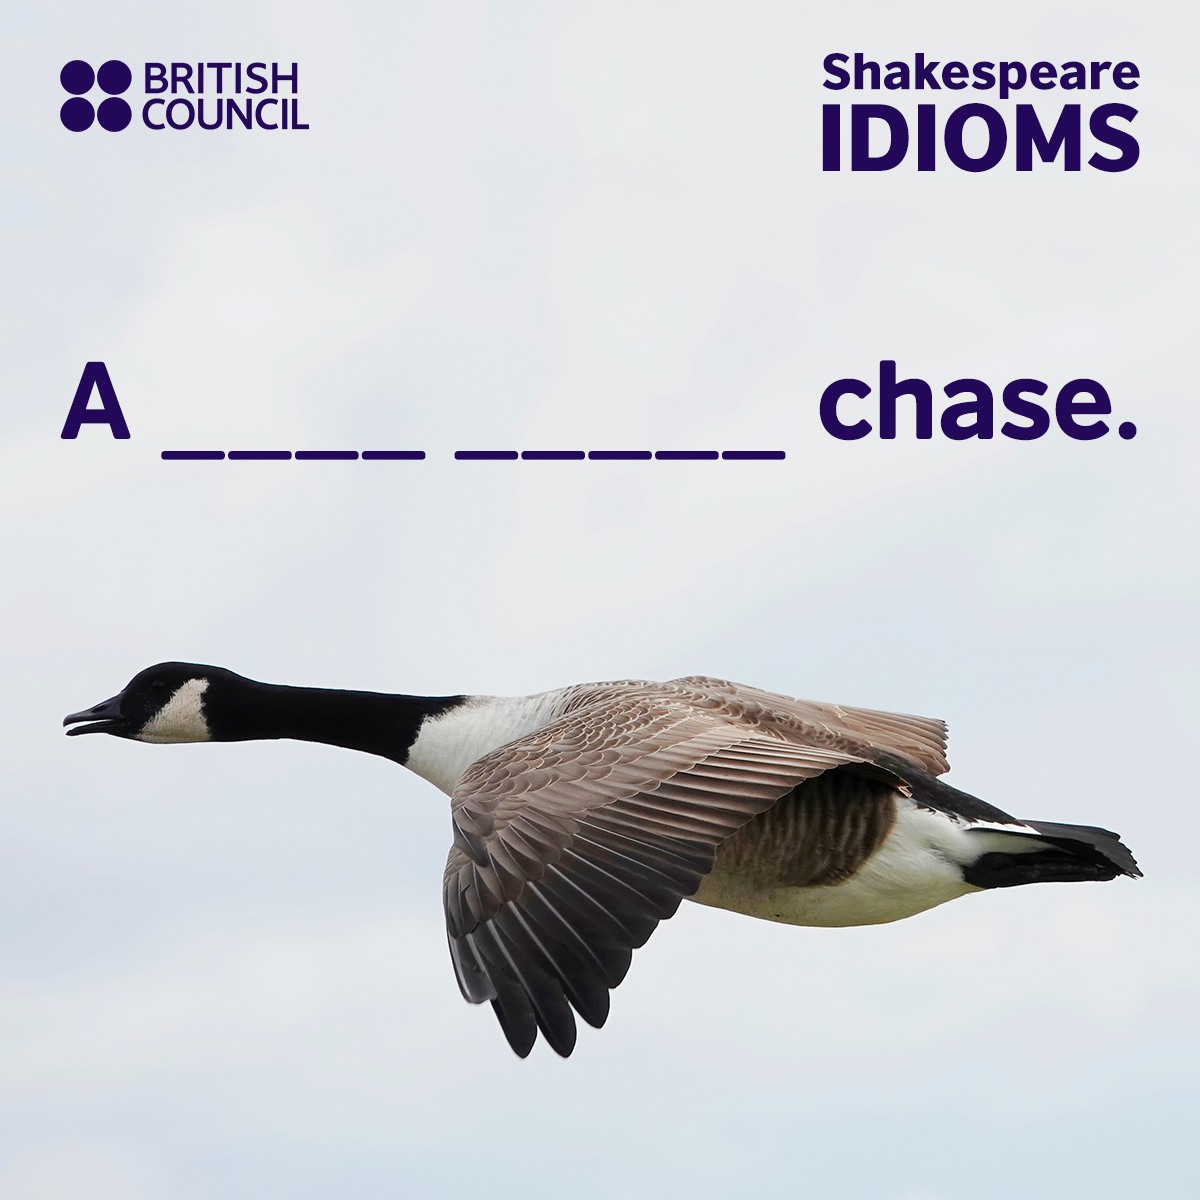 Today is #ShakespeareDay and #EnglishLanguageDay! We're celebrating some of the idioms that Shakespeare invented that we still use today, like this one! Do you know what the missing words are? 🤔
#idioms #LearnEnglish #learningenglish #Shakespeare #englishlanguage